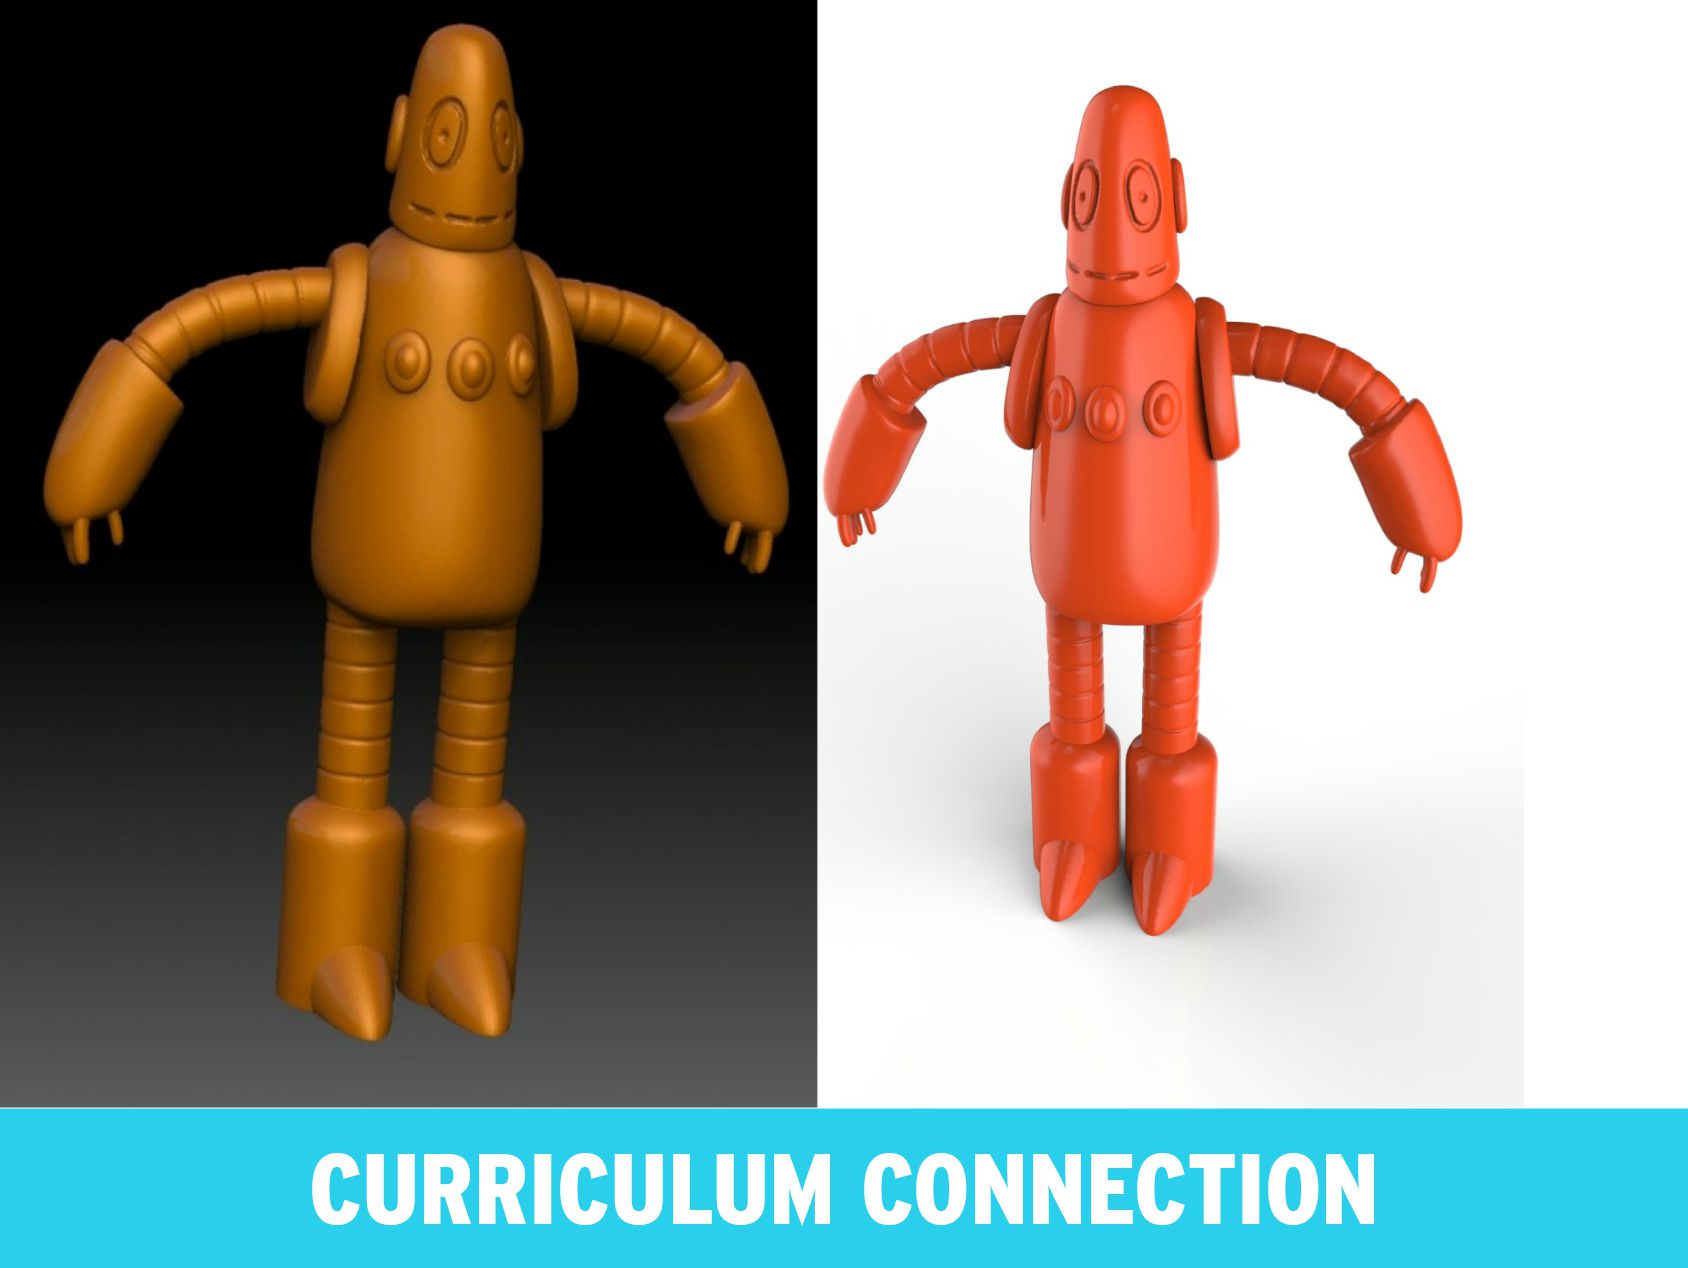 3D Robots: How This Teacher Introduced 3D Printing to Her Students